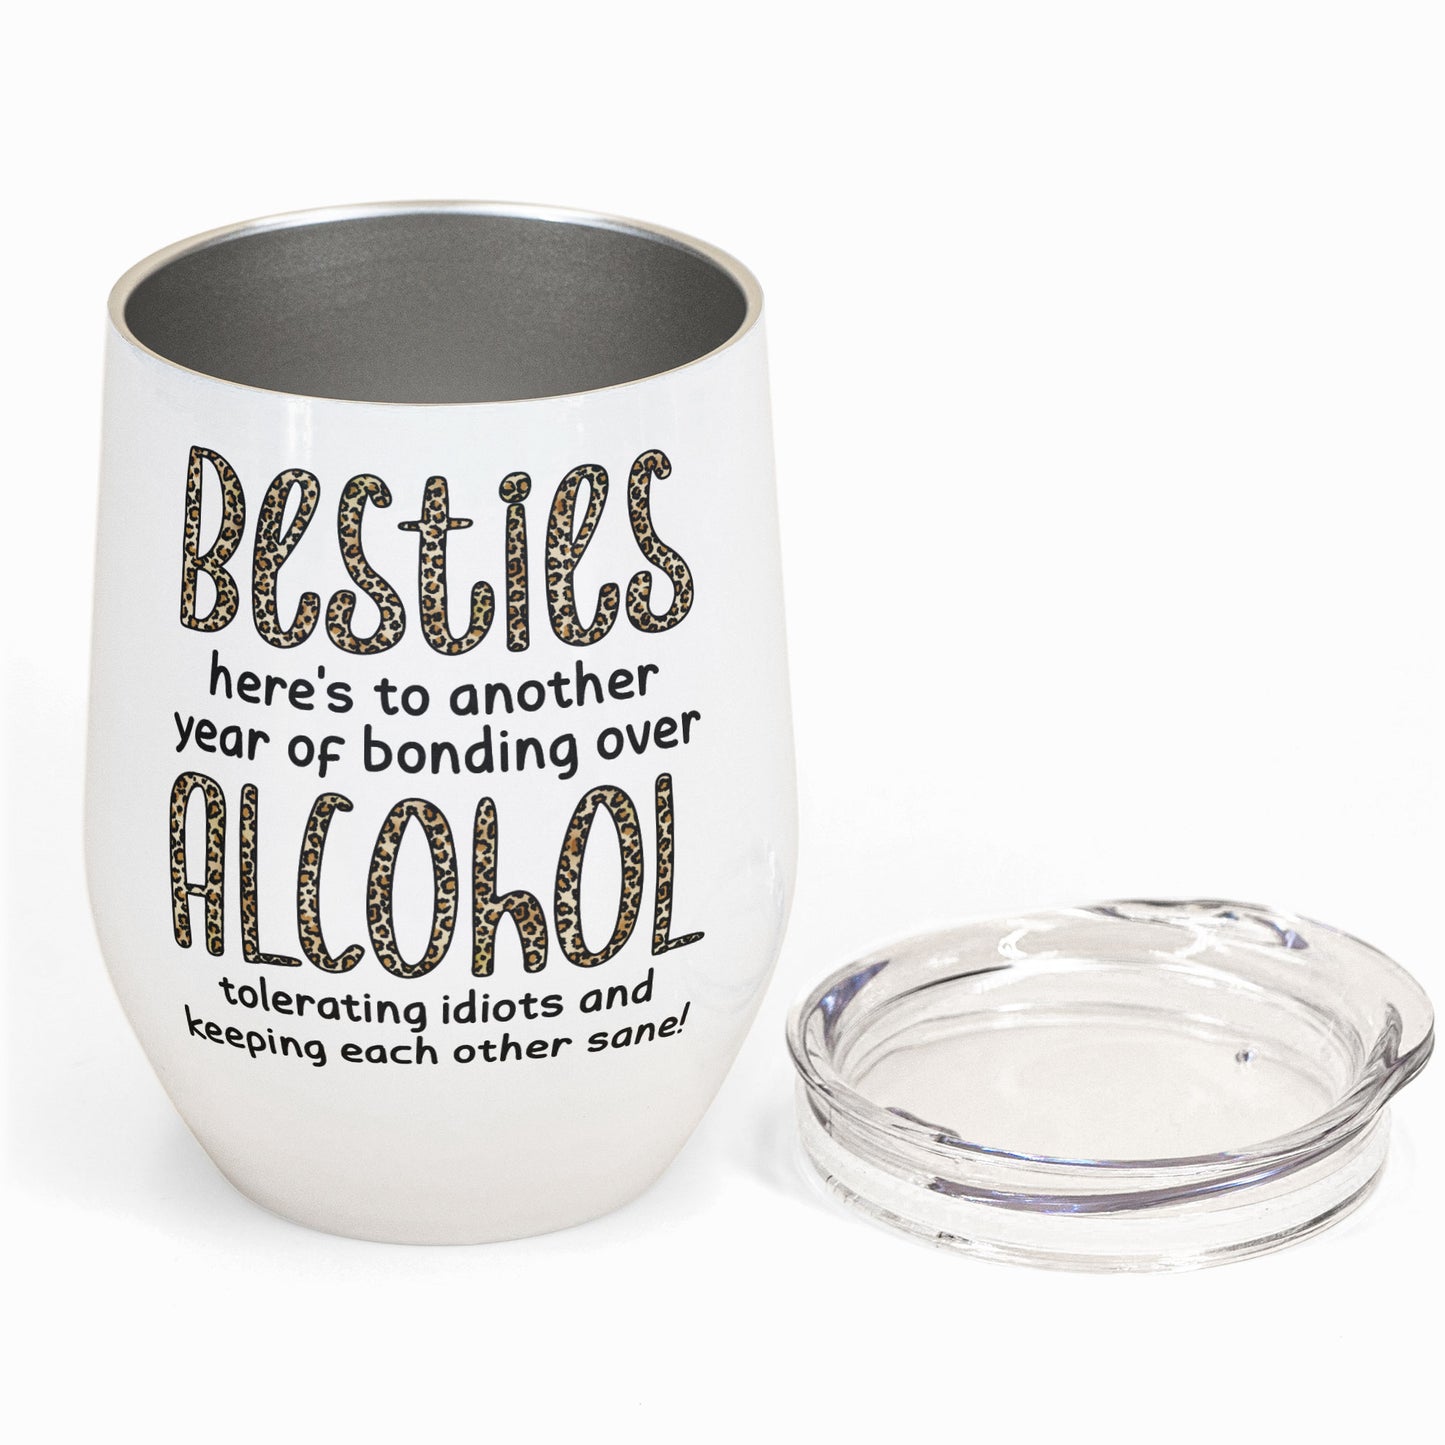 https://macorner.co/cdn/shop/products/Besties-Alcohol-Tolerating-Bonding-Over-Keeping-Each-Other-Sane--Personalized-Wine-Tumbler-Birthday-New-Year-Gift-For-Besties-Soul-Sisters-Sistas-BFF-Friends-Leopard-Pattern-Jacket-Wo_13c9d182-f5cb-481c-8396-eed63647693c.jpg?v=1639972748&width=1445